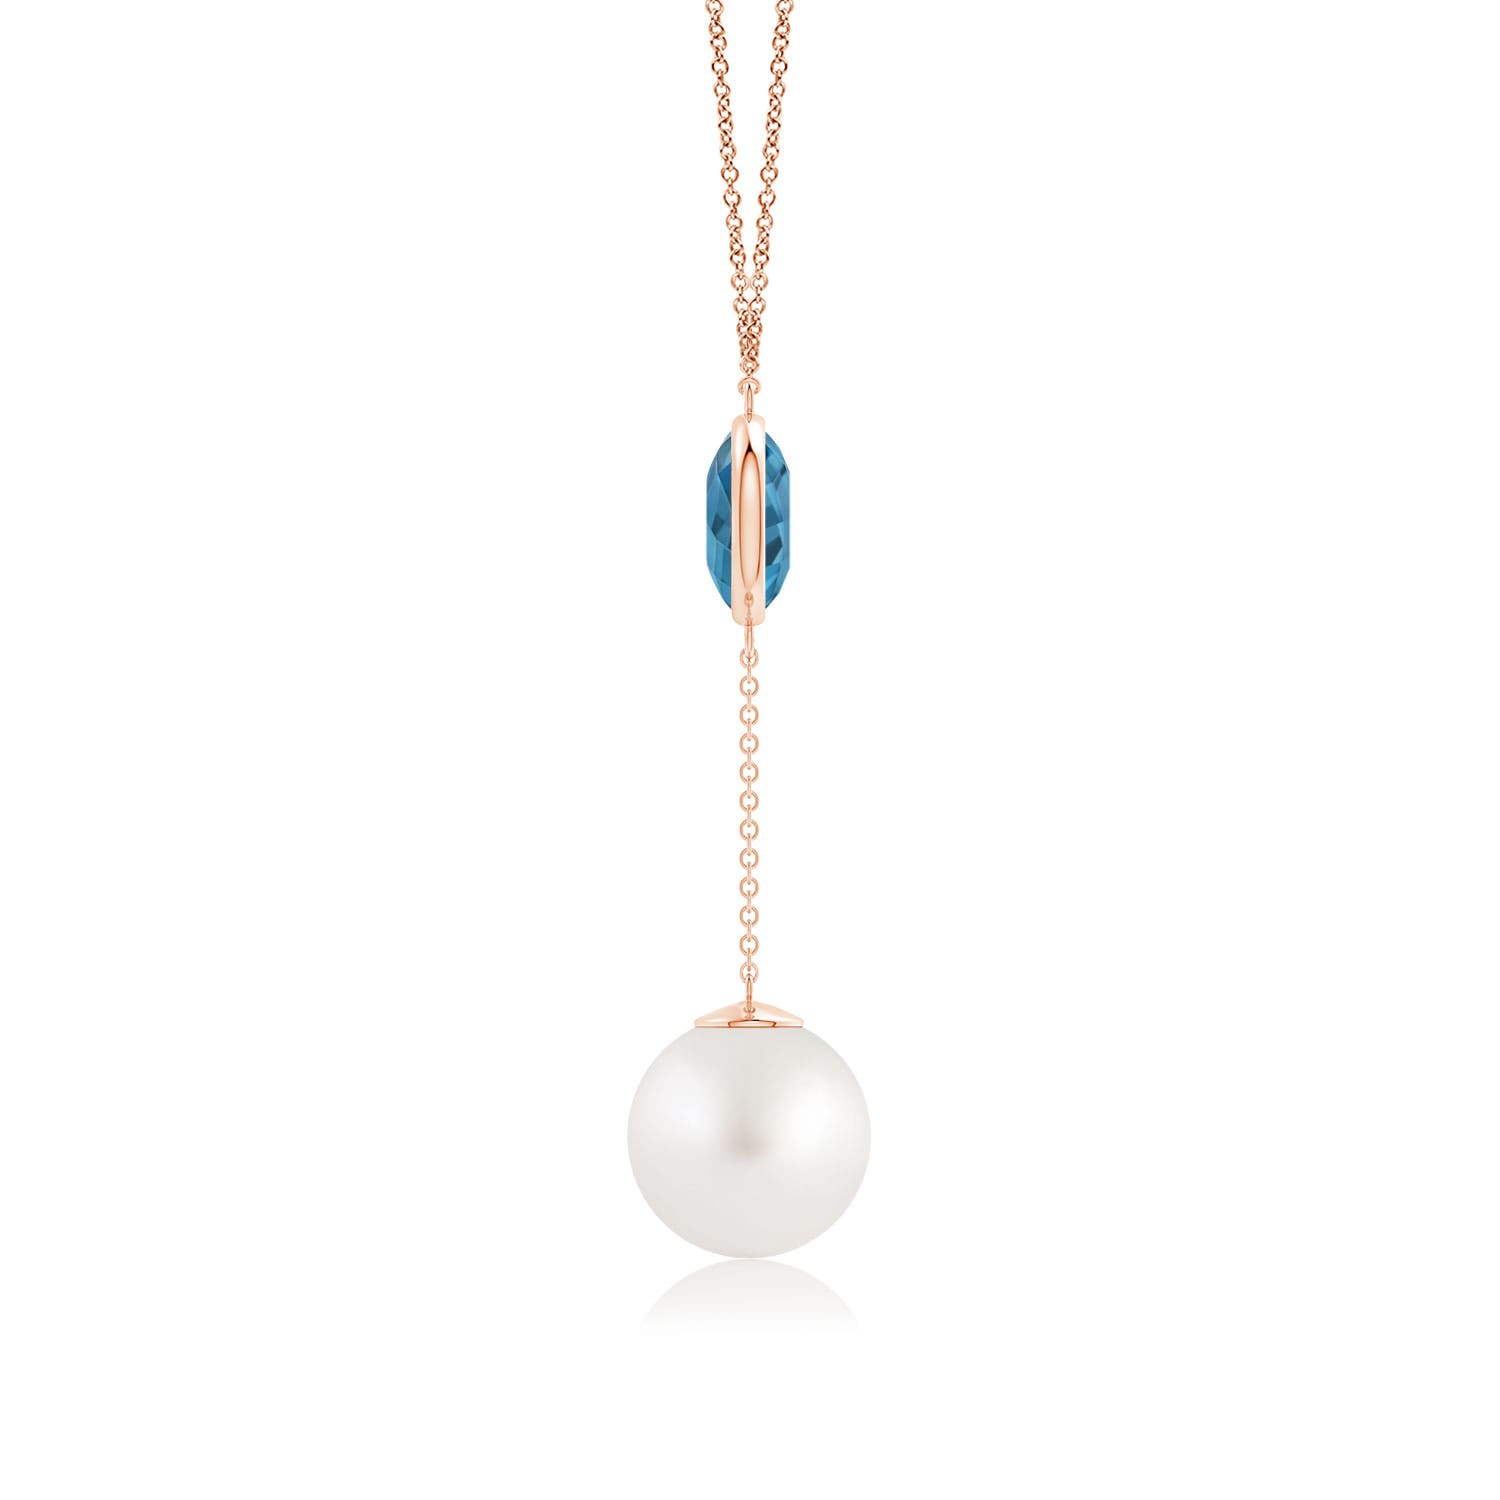 AA - South Sea Cultured Pearl / 16.2 CT / 14 KT Rose Gold